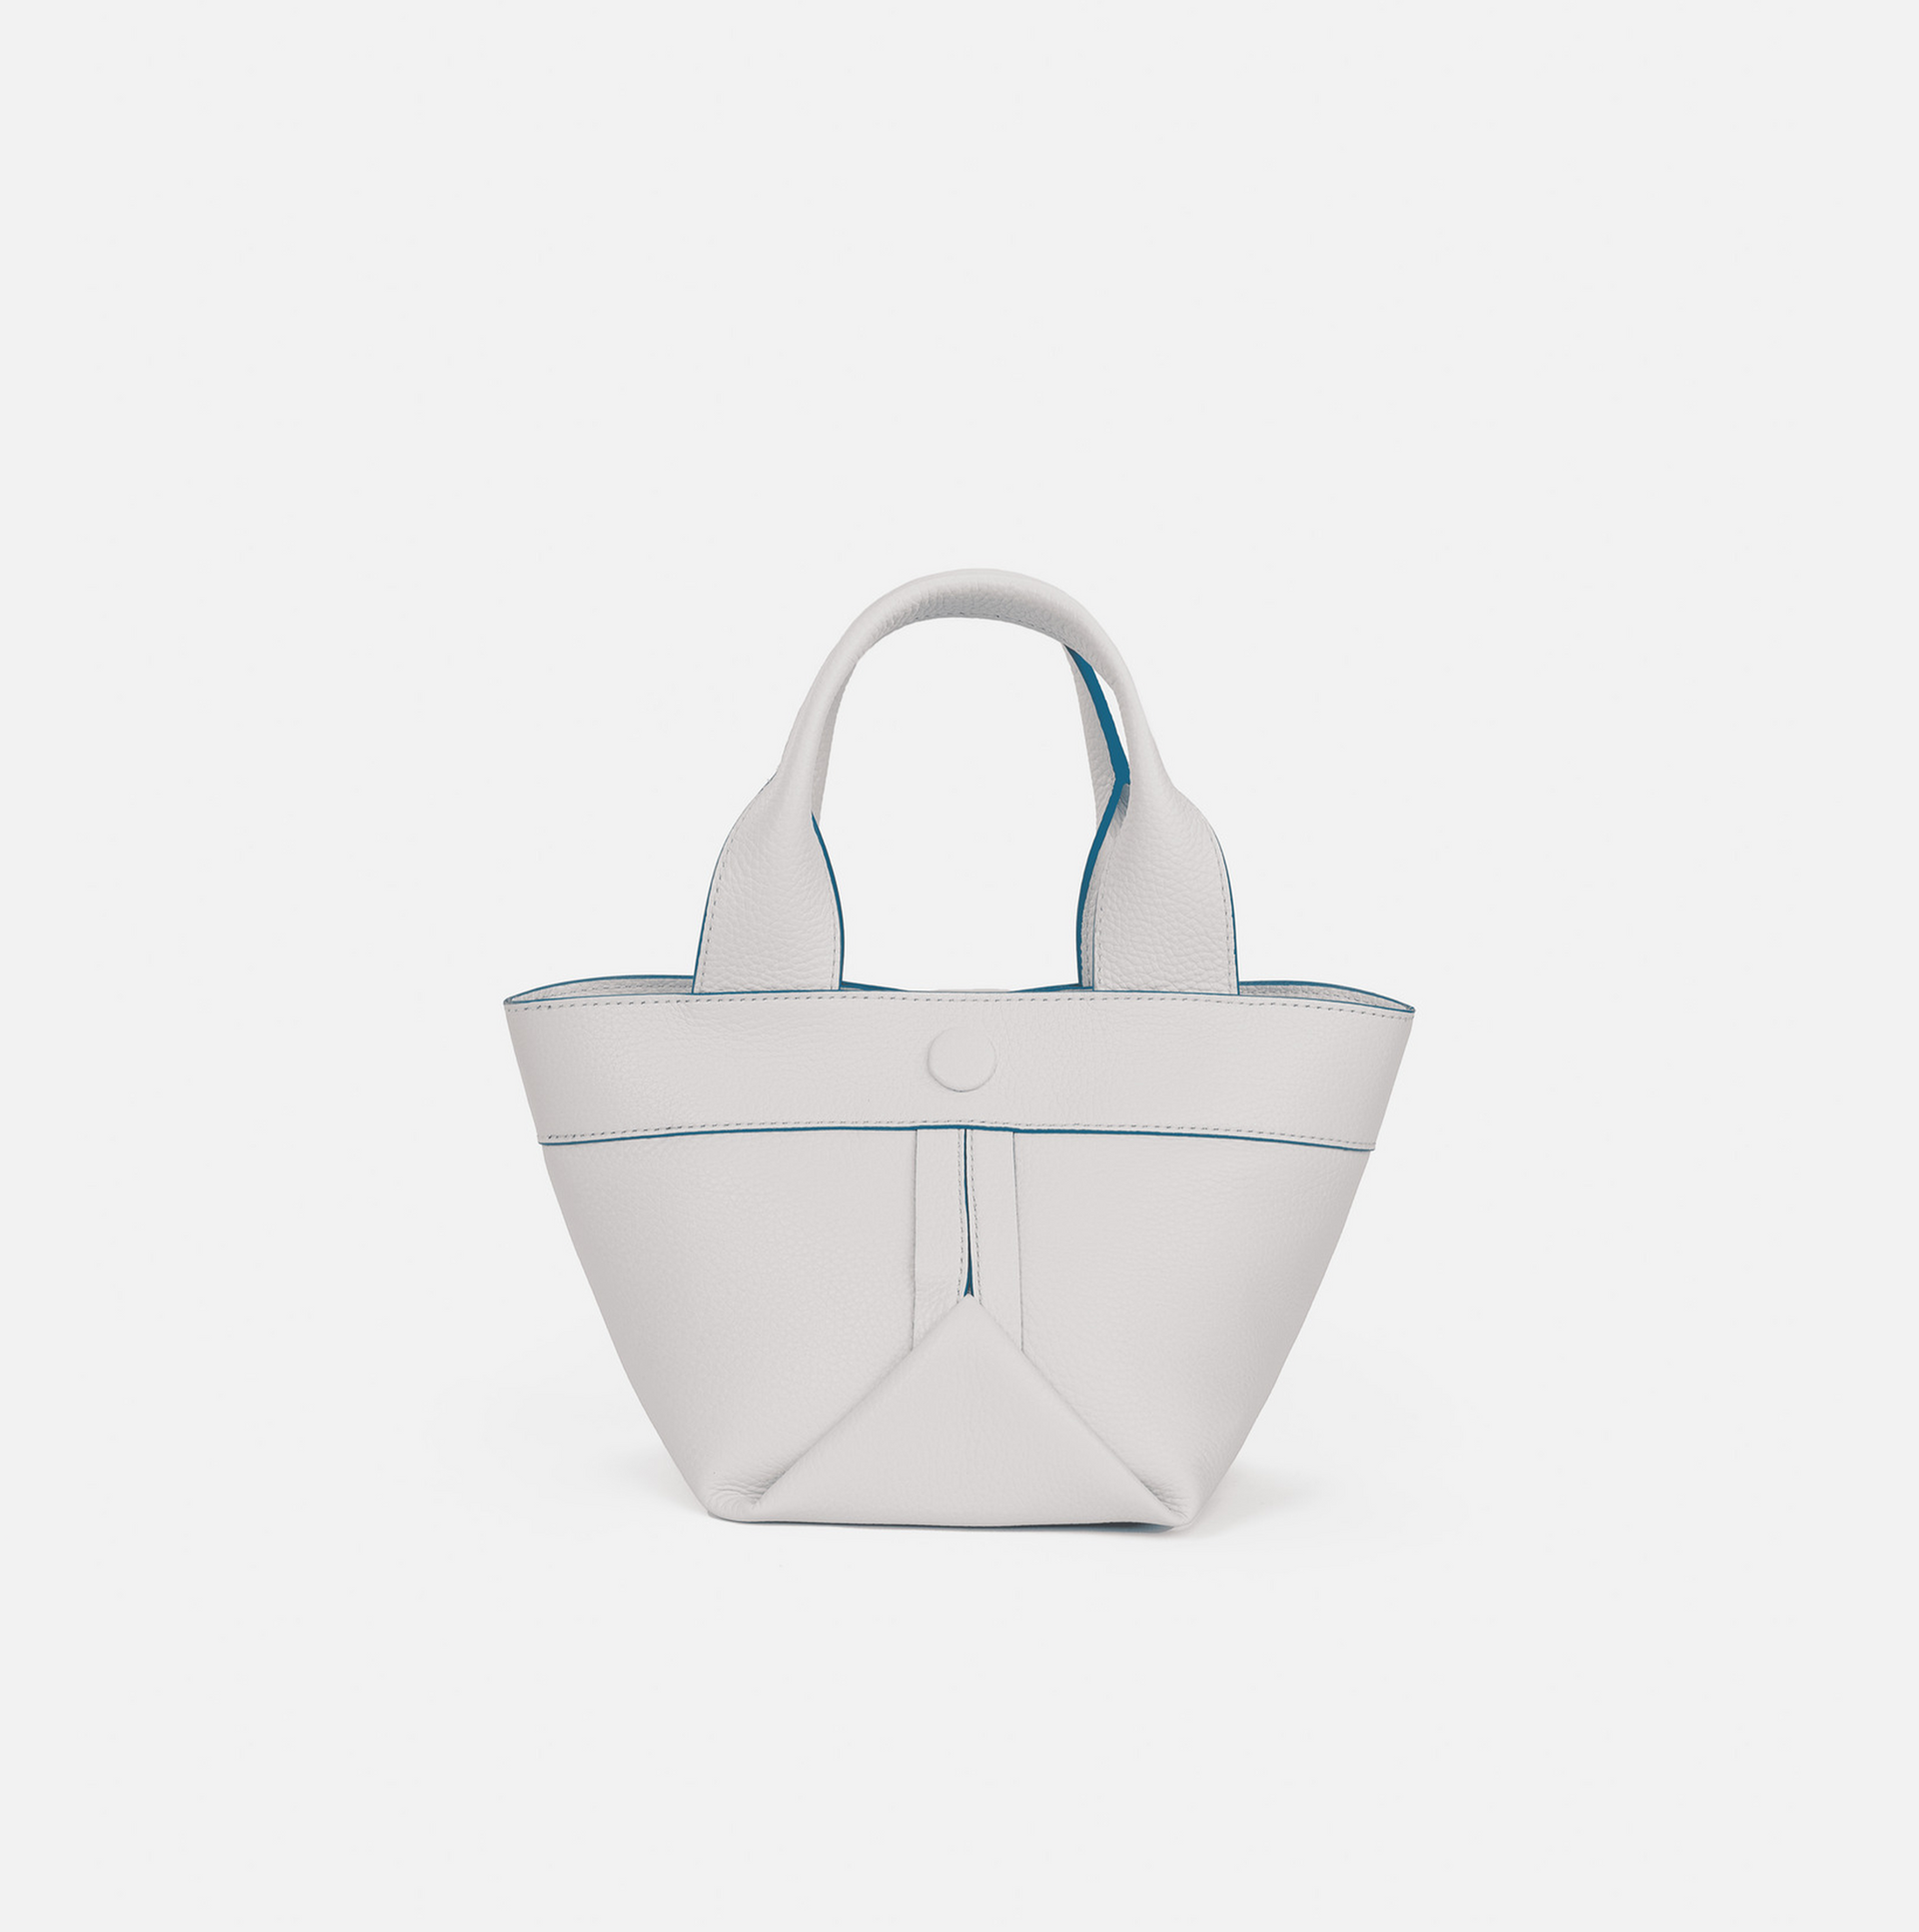 Gusset small pebble leather tote in white with cobalt blue edge paint - ro  bags